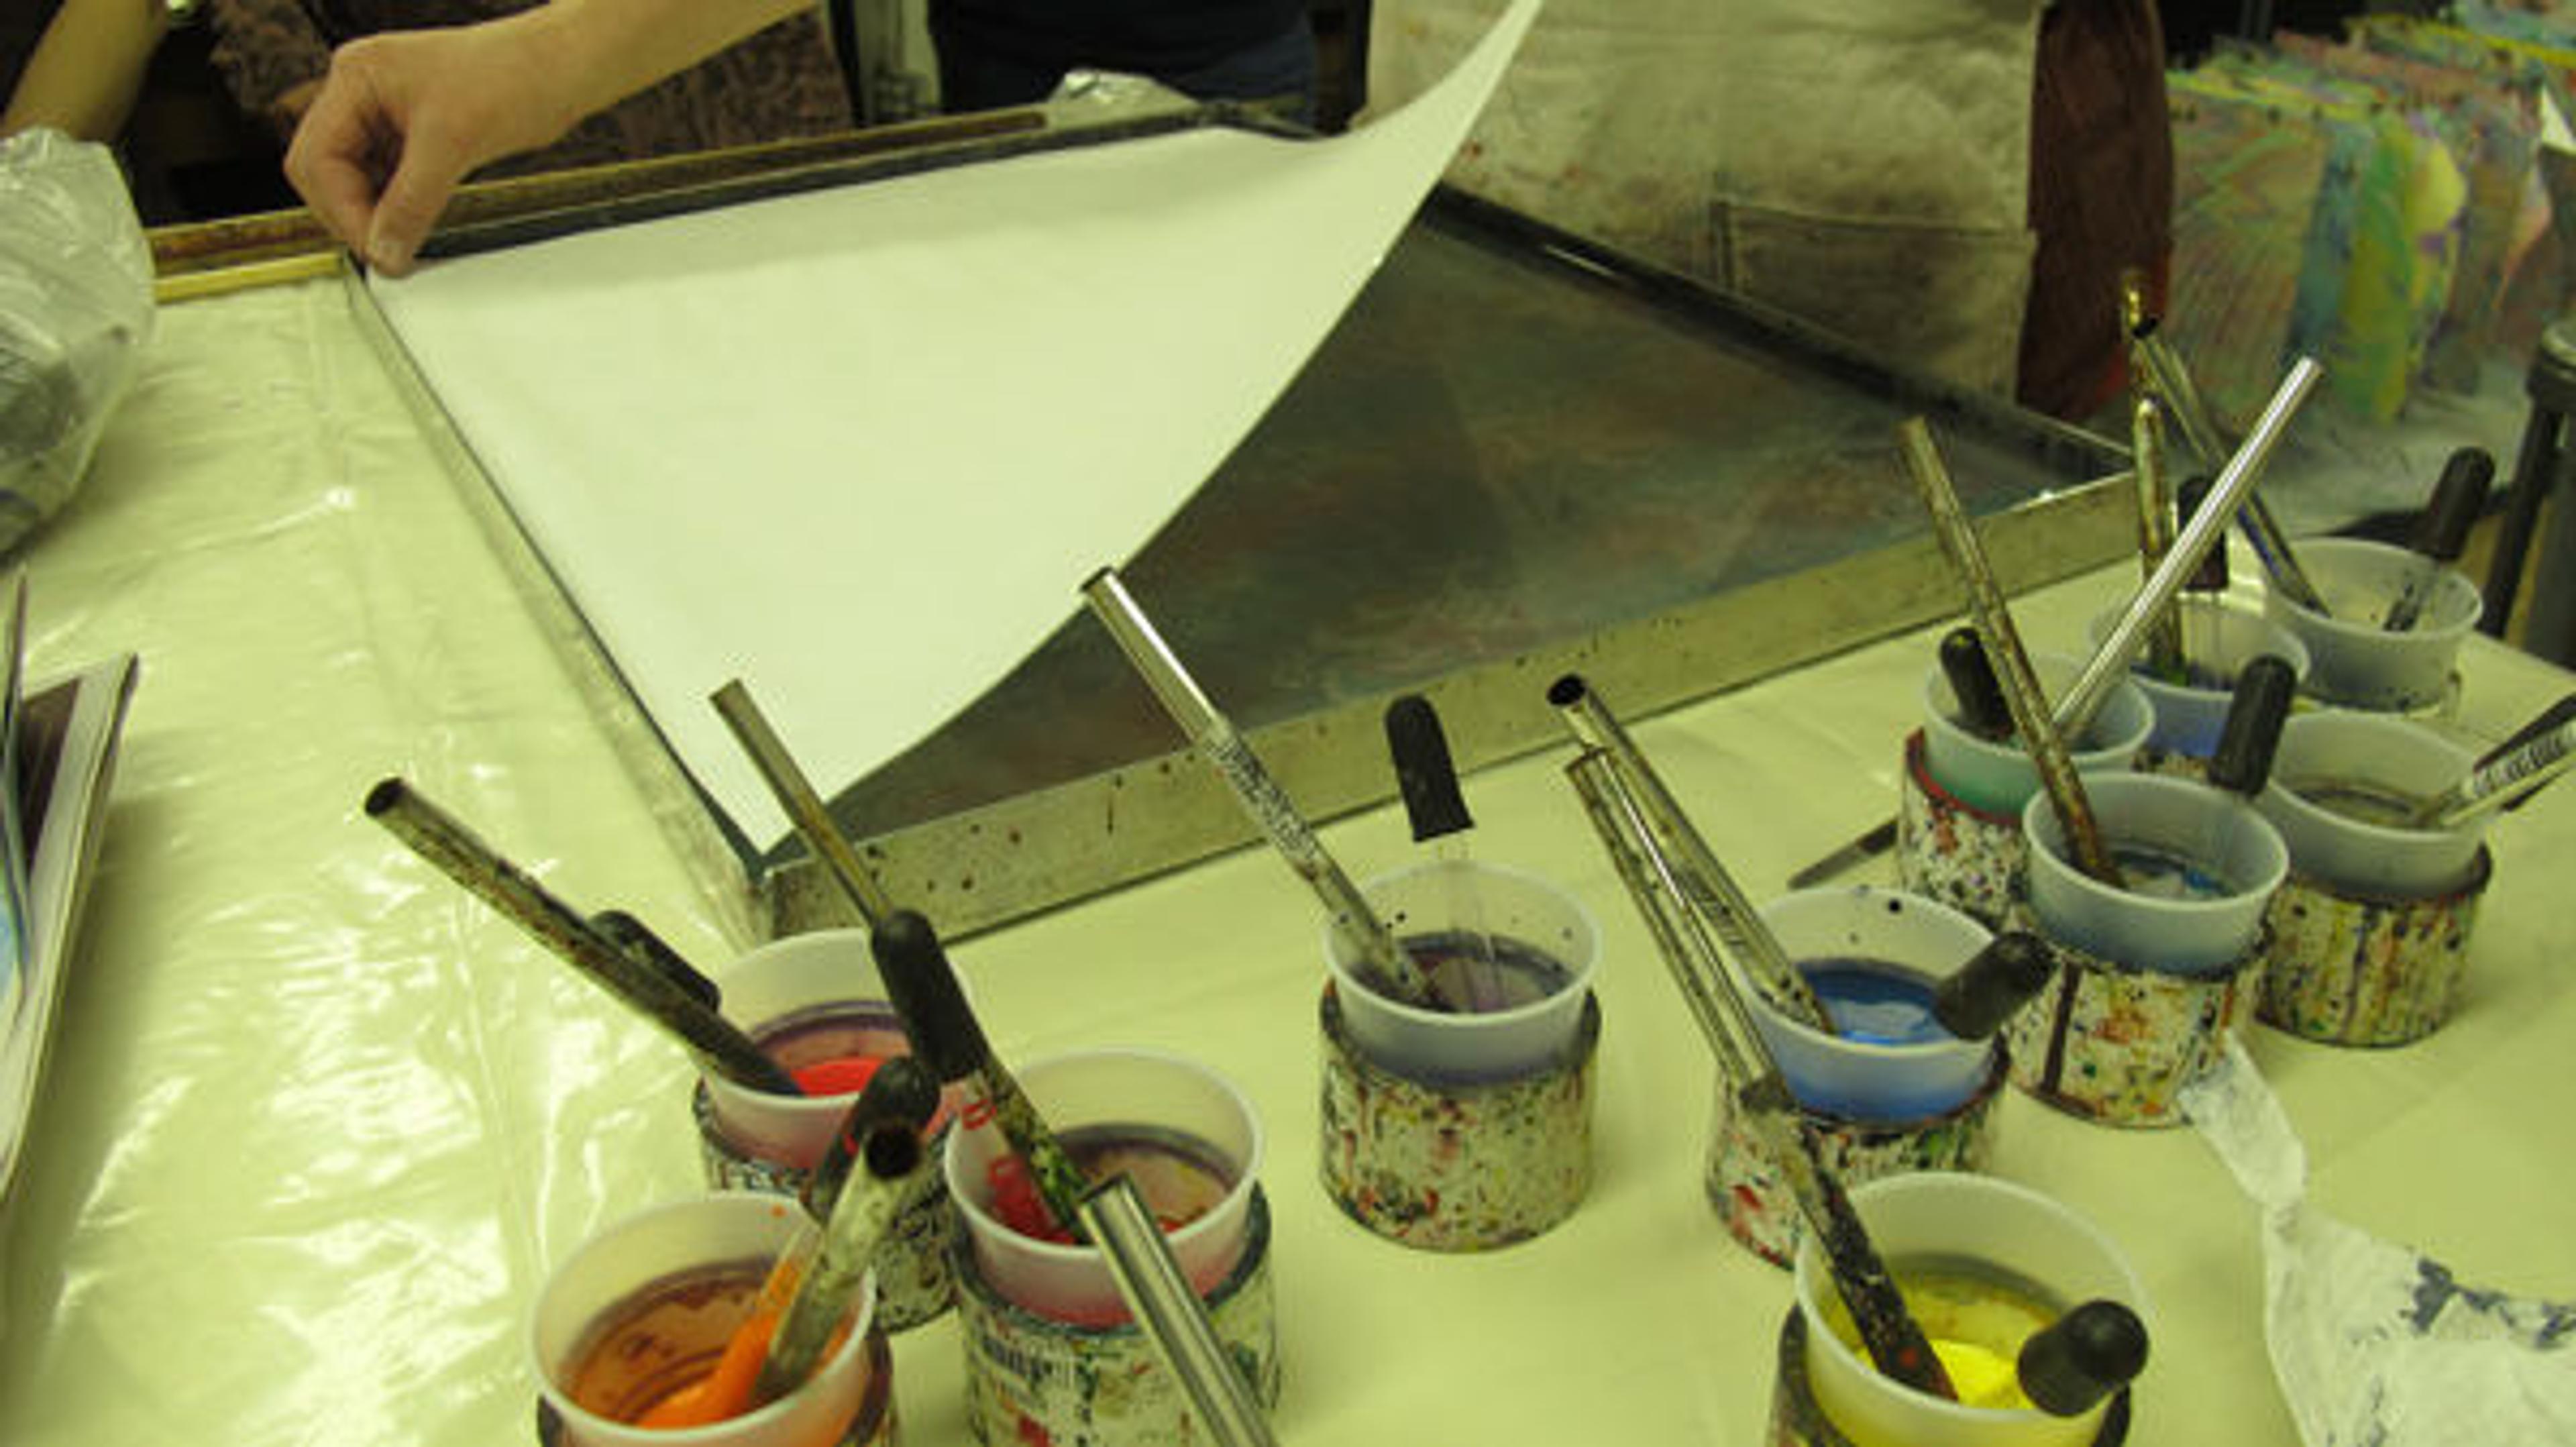 Carefully laying down the prepared alum-sized paper to transfer the marbled dyes